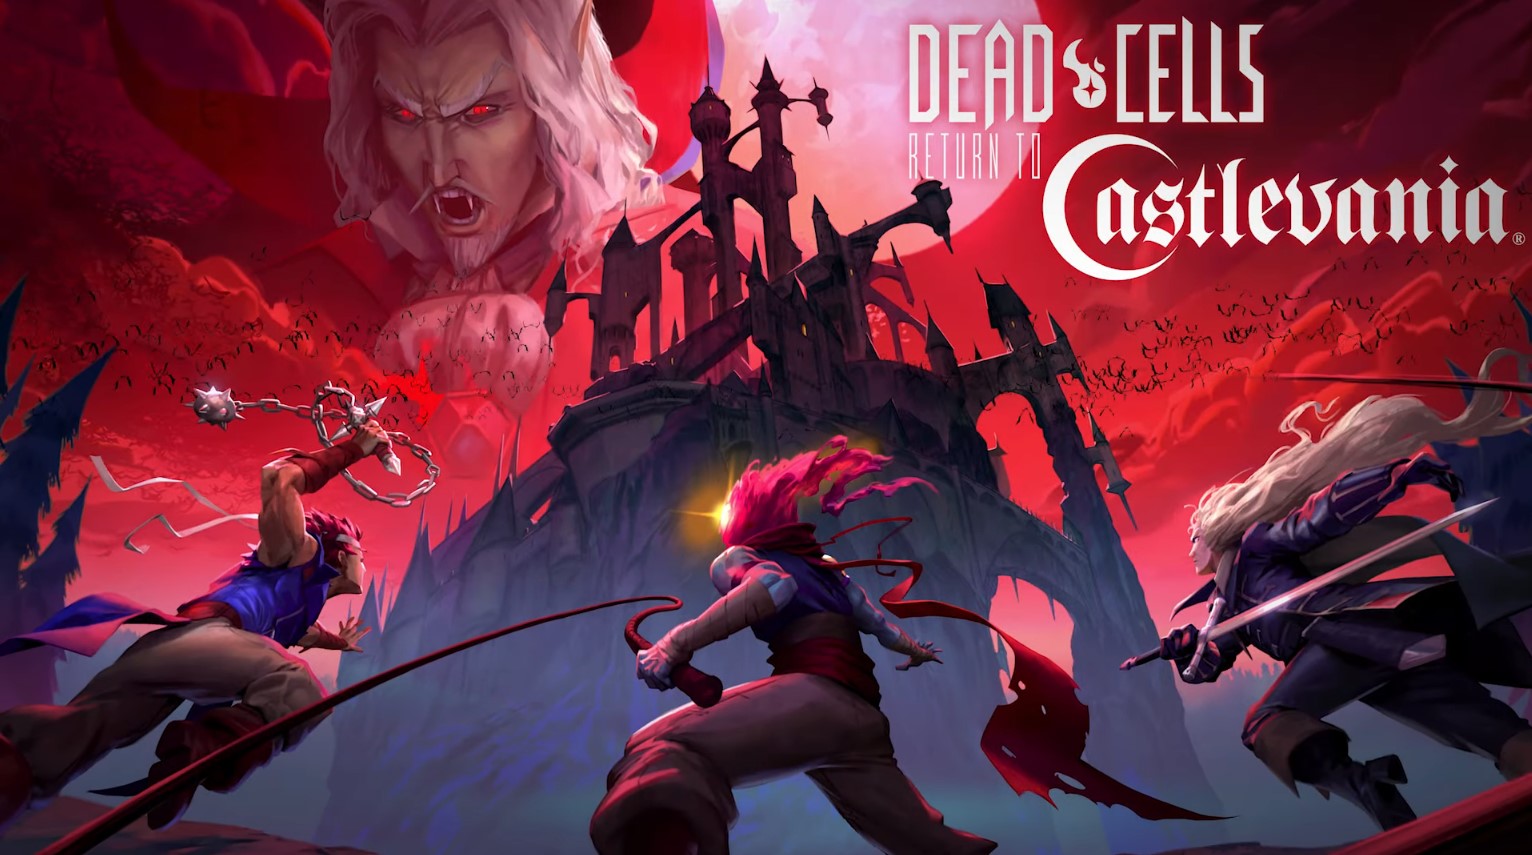 Dead Cells: Return to Castlevania Launches Today